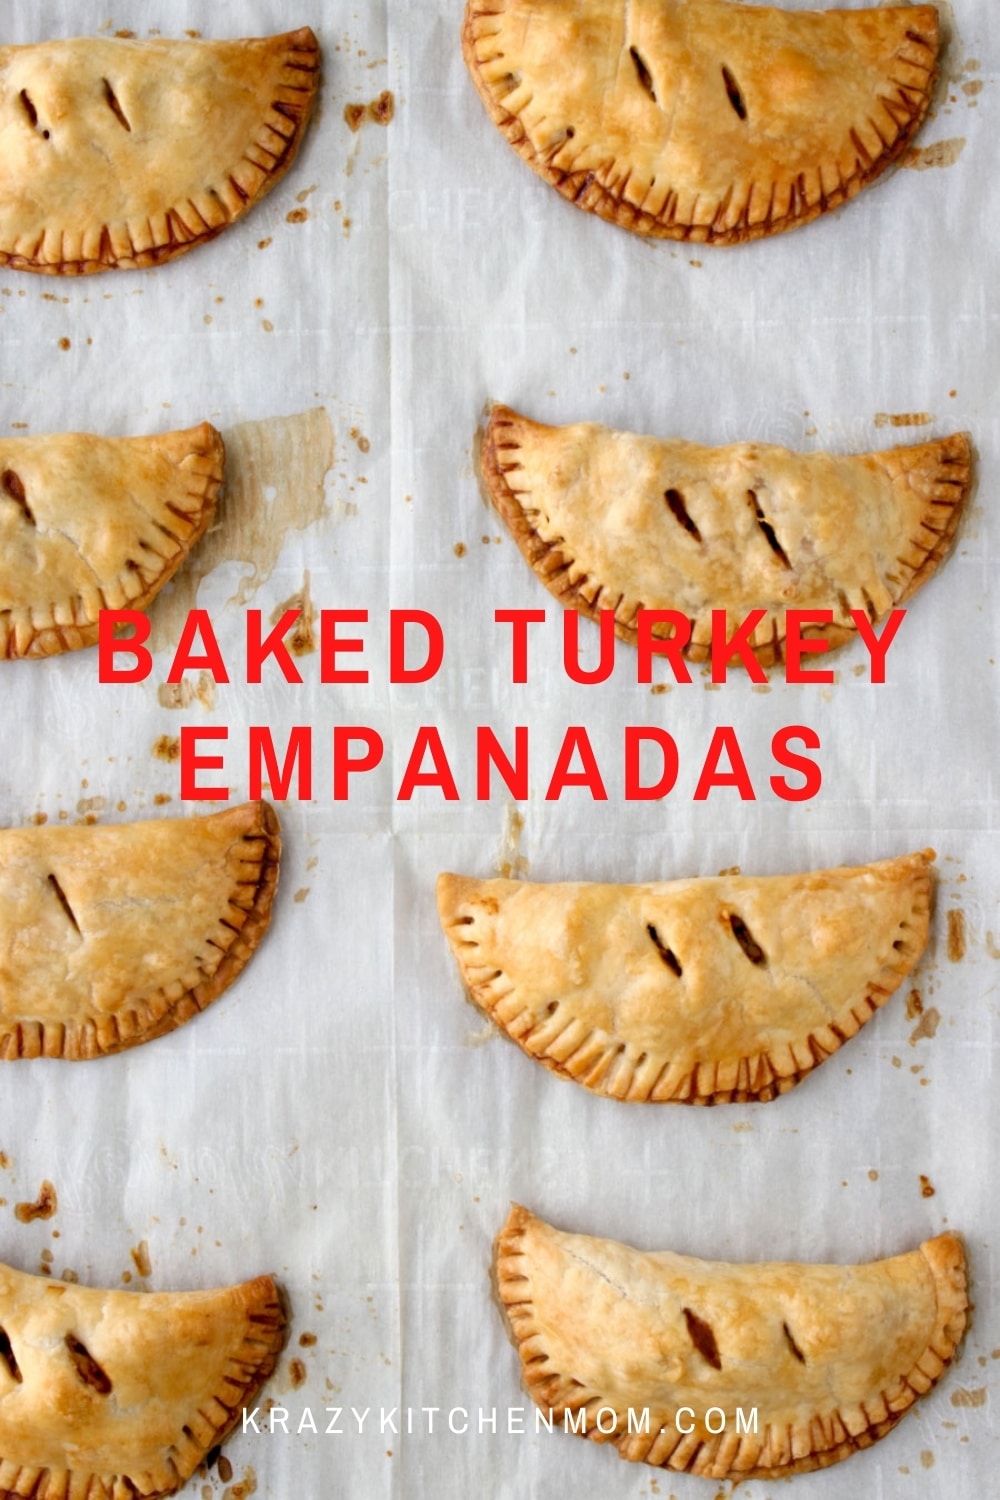 Baked Turkey Empanadas Made with Ground Turkey Breast are an easy calorie-conscious snack or quick dinner for the entire family. via @krazykitchenmom